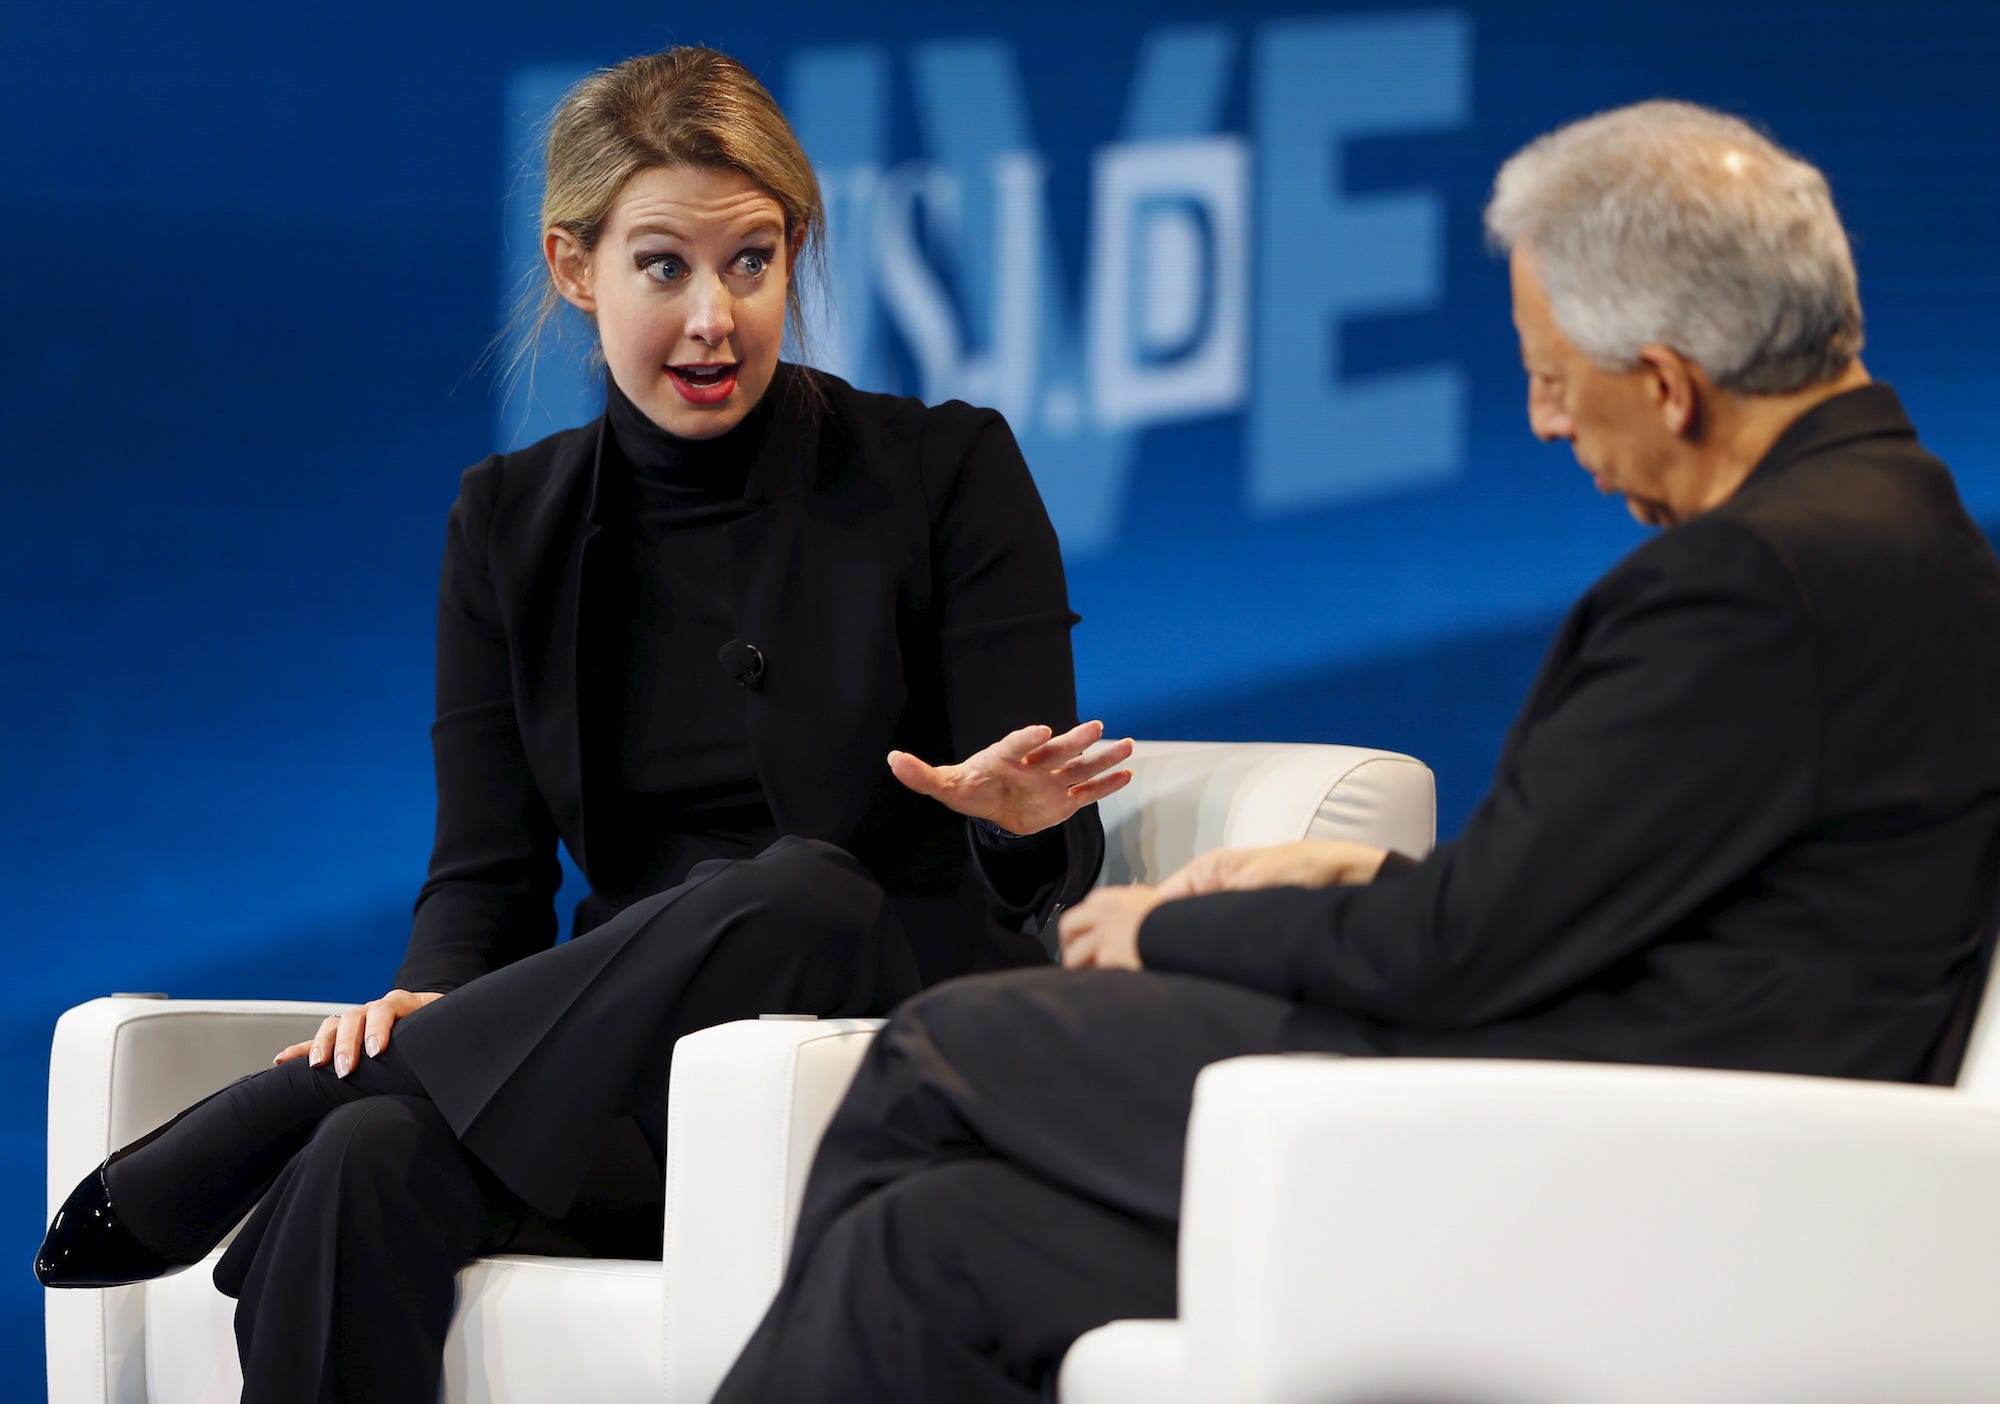 <p>Ellison has held shares in some of the most recognizable companies, one of which was the infamous blood-testing company <a href="https://www.businessinsider.com/theranos-founder-ceo-elizabeth-holmes-life-story-bio-2018-4">Theranos, founded by Elizabeth Holmes</a>. It had a promising future until its flaws were exposed and Holmes received a prison sentence.</p><p>When Steve Jobs returned to Apple as CEO back in 1997, he asked Ellison to sit on the board. Ellison served for a while, but felt that he couldn't devote the time and left in 2002, according to <a href="https://www.forbes.com/2002/09/20/0920ellison.html?sh=4bf3a2d5f1ea">Forbes</a>. Compensation for his role was an option to buy about 70,000 shares, which would've amounted to about $1 million at the time of his departure.</p>